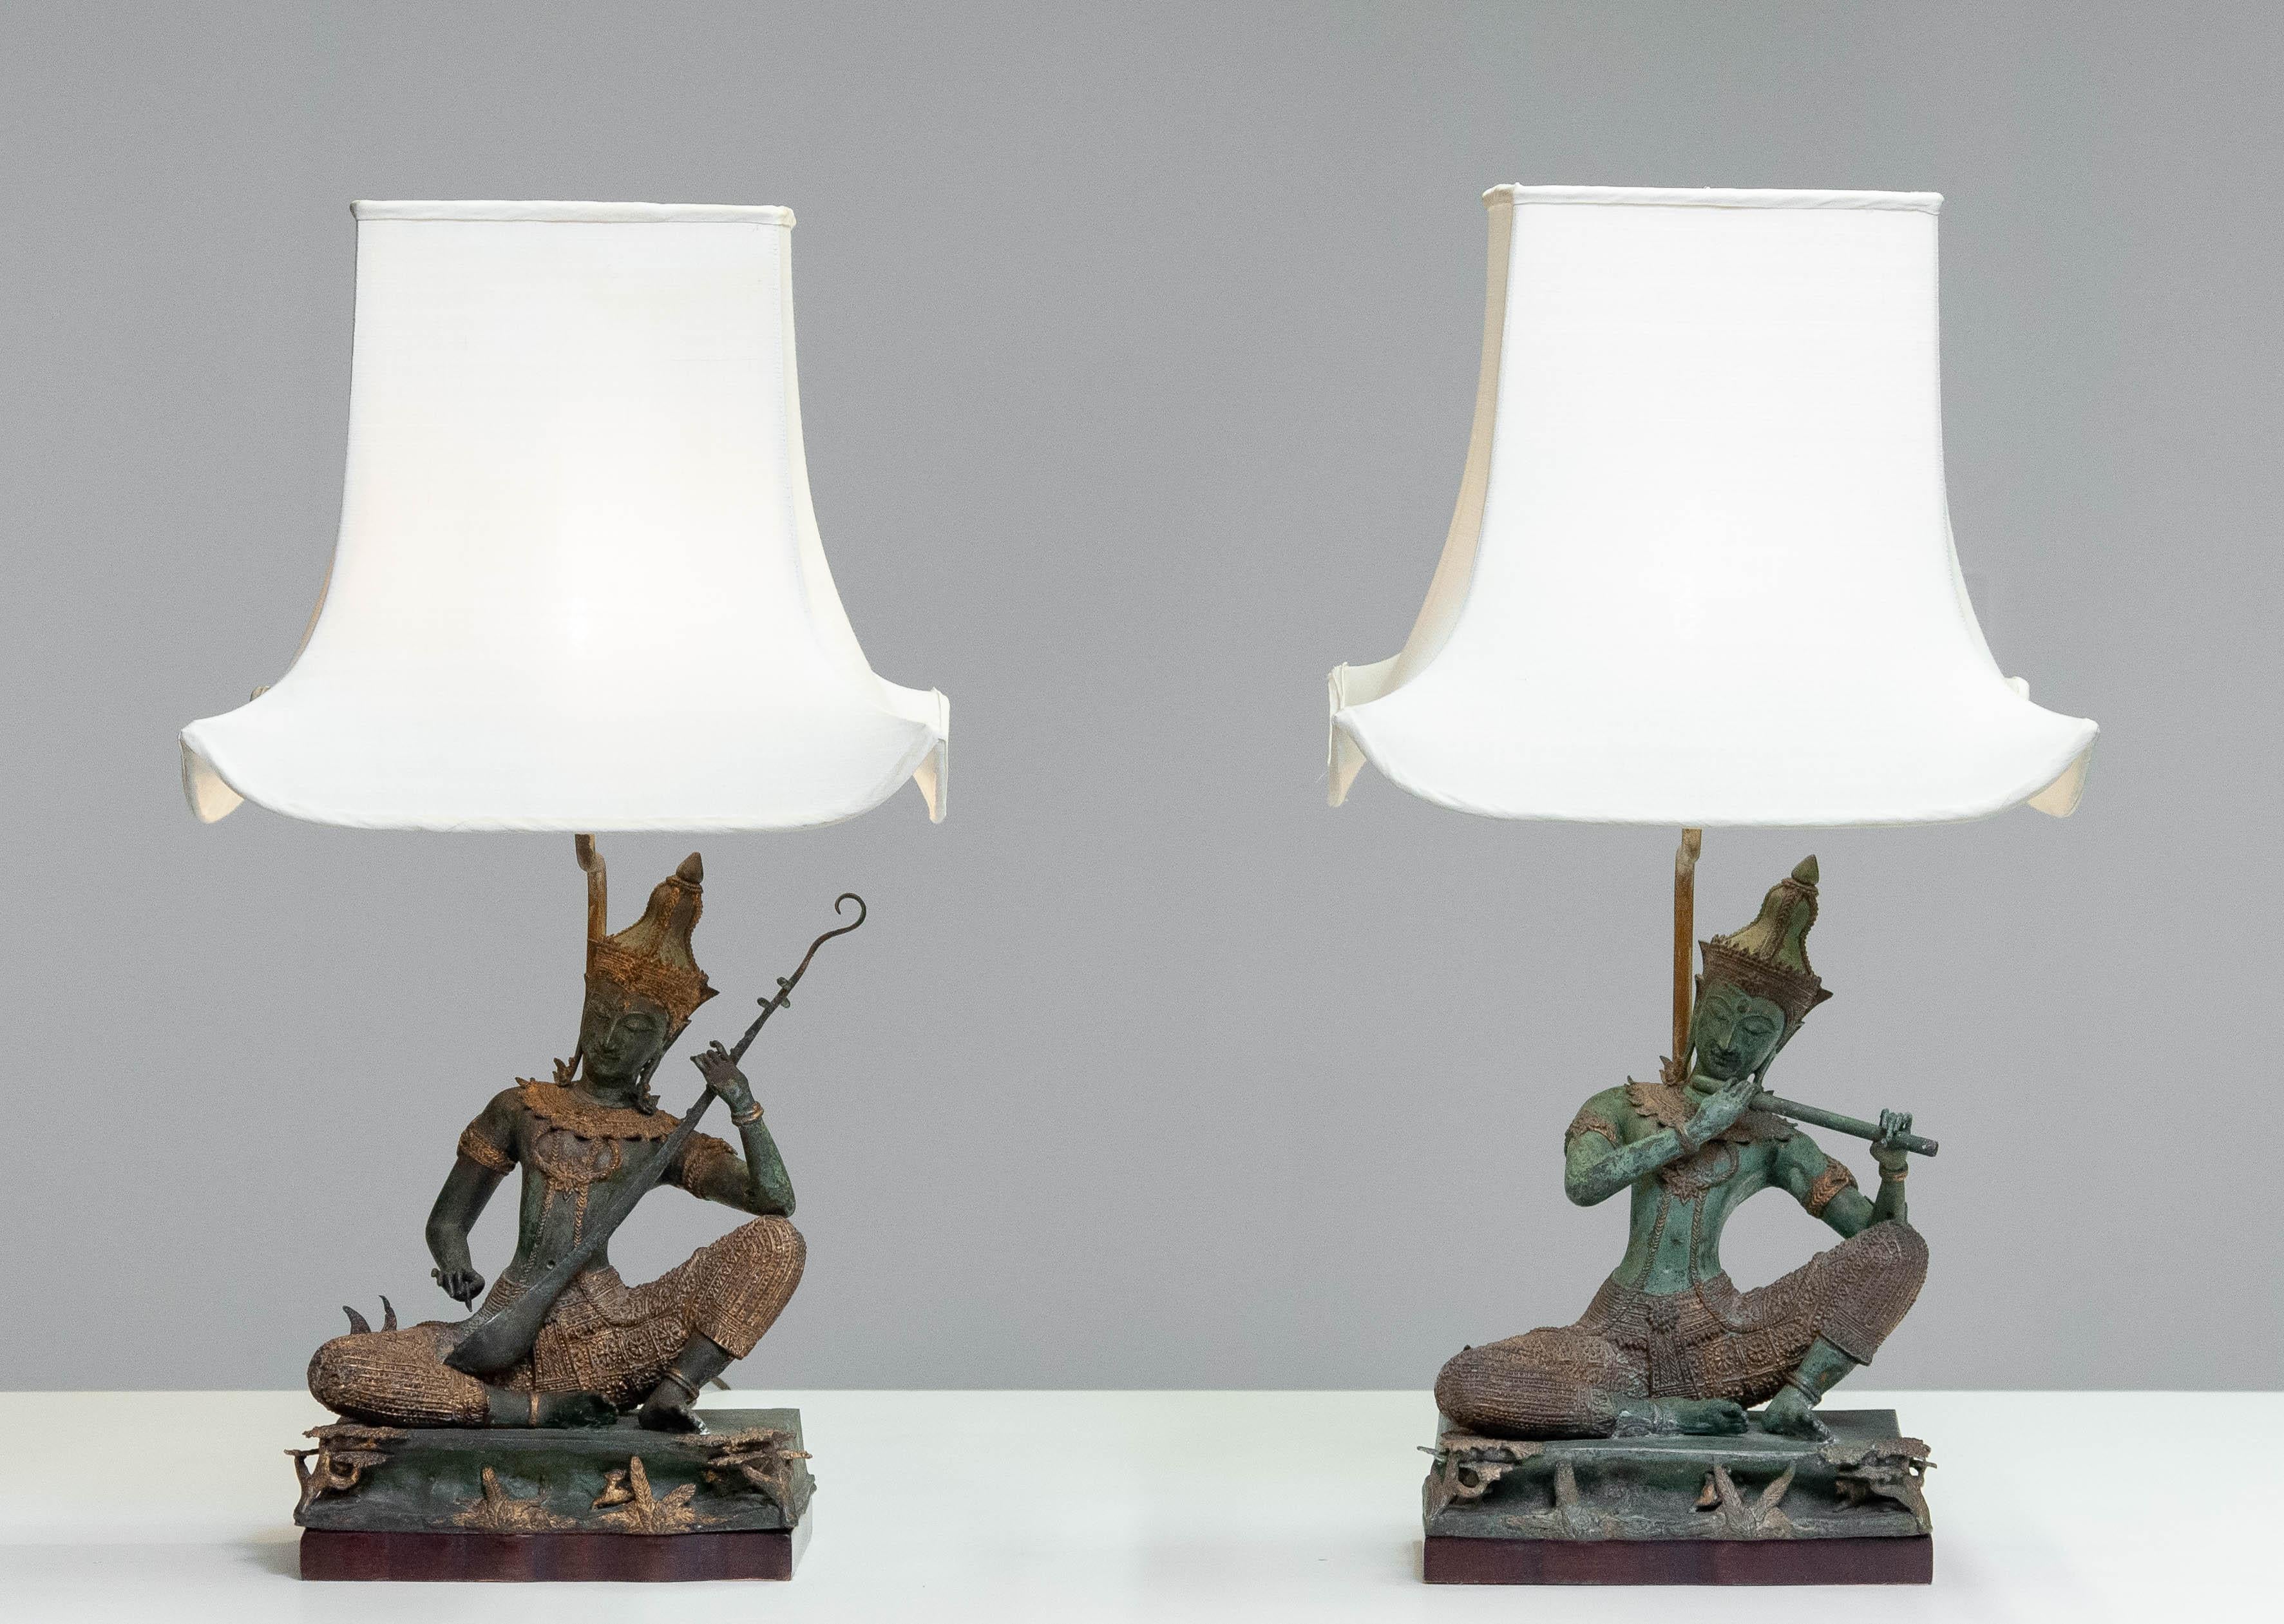 Pair beautiful and very decorative tables lamps from Thailand with extremely detailed brass statues from Phra Aphai Mani from the 1970s. One playing a Khlui flute and the other playing the Jakhee ( three stringed guitar ).

Both sitting and